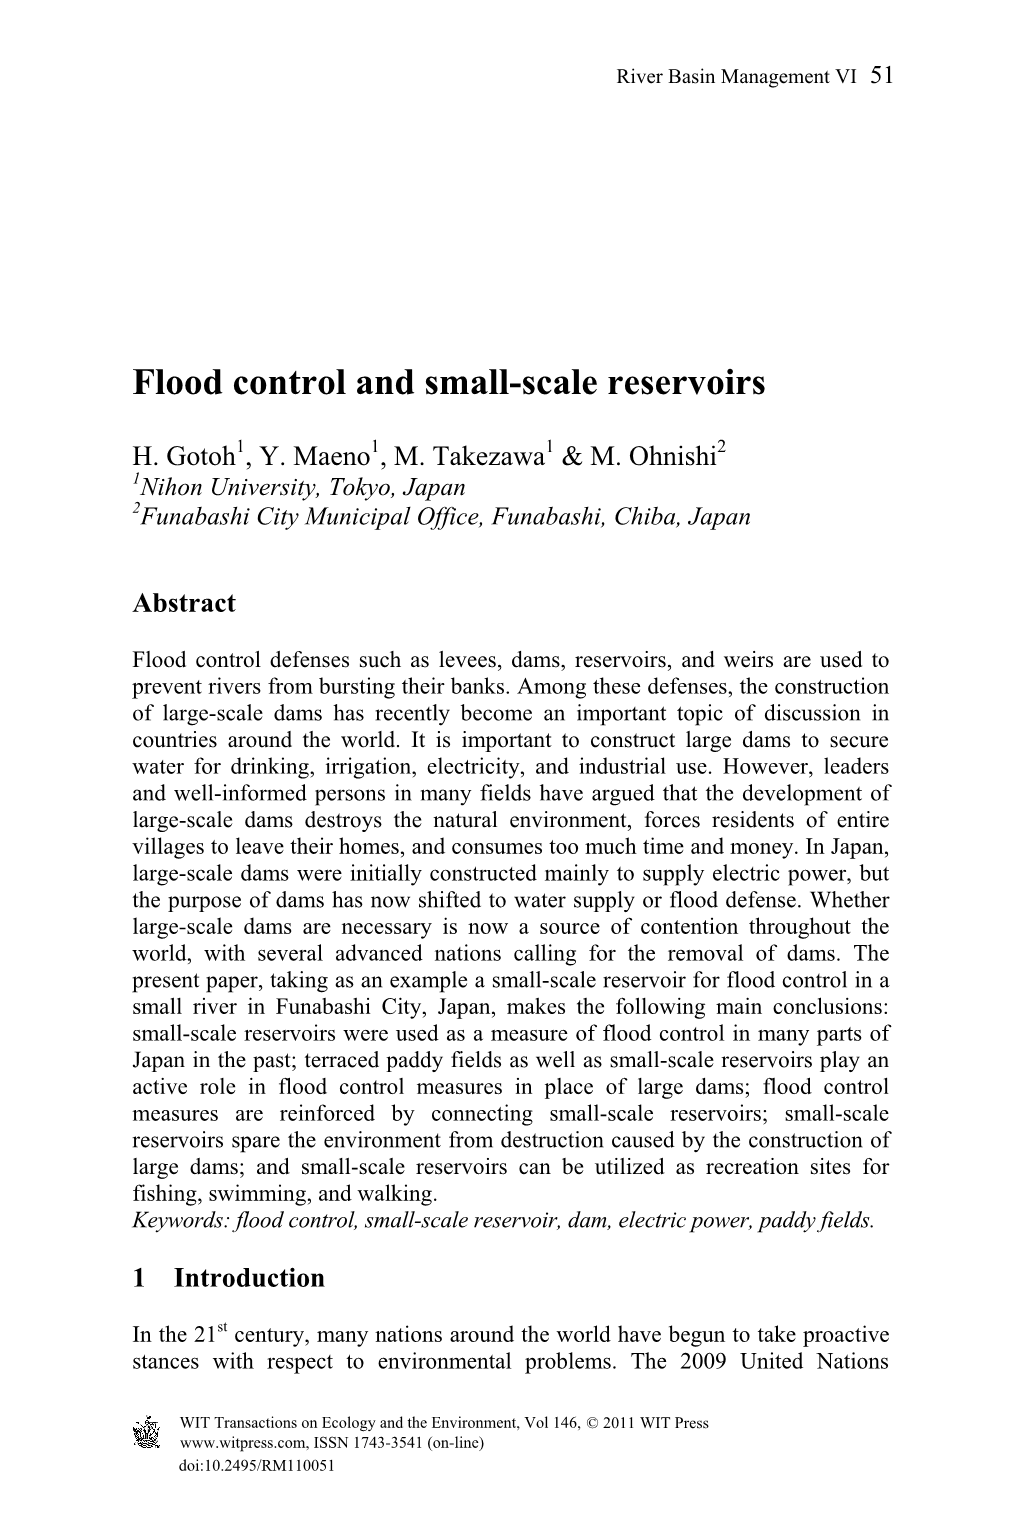 Flood Control and Small-Scale Reservoirs